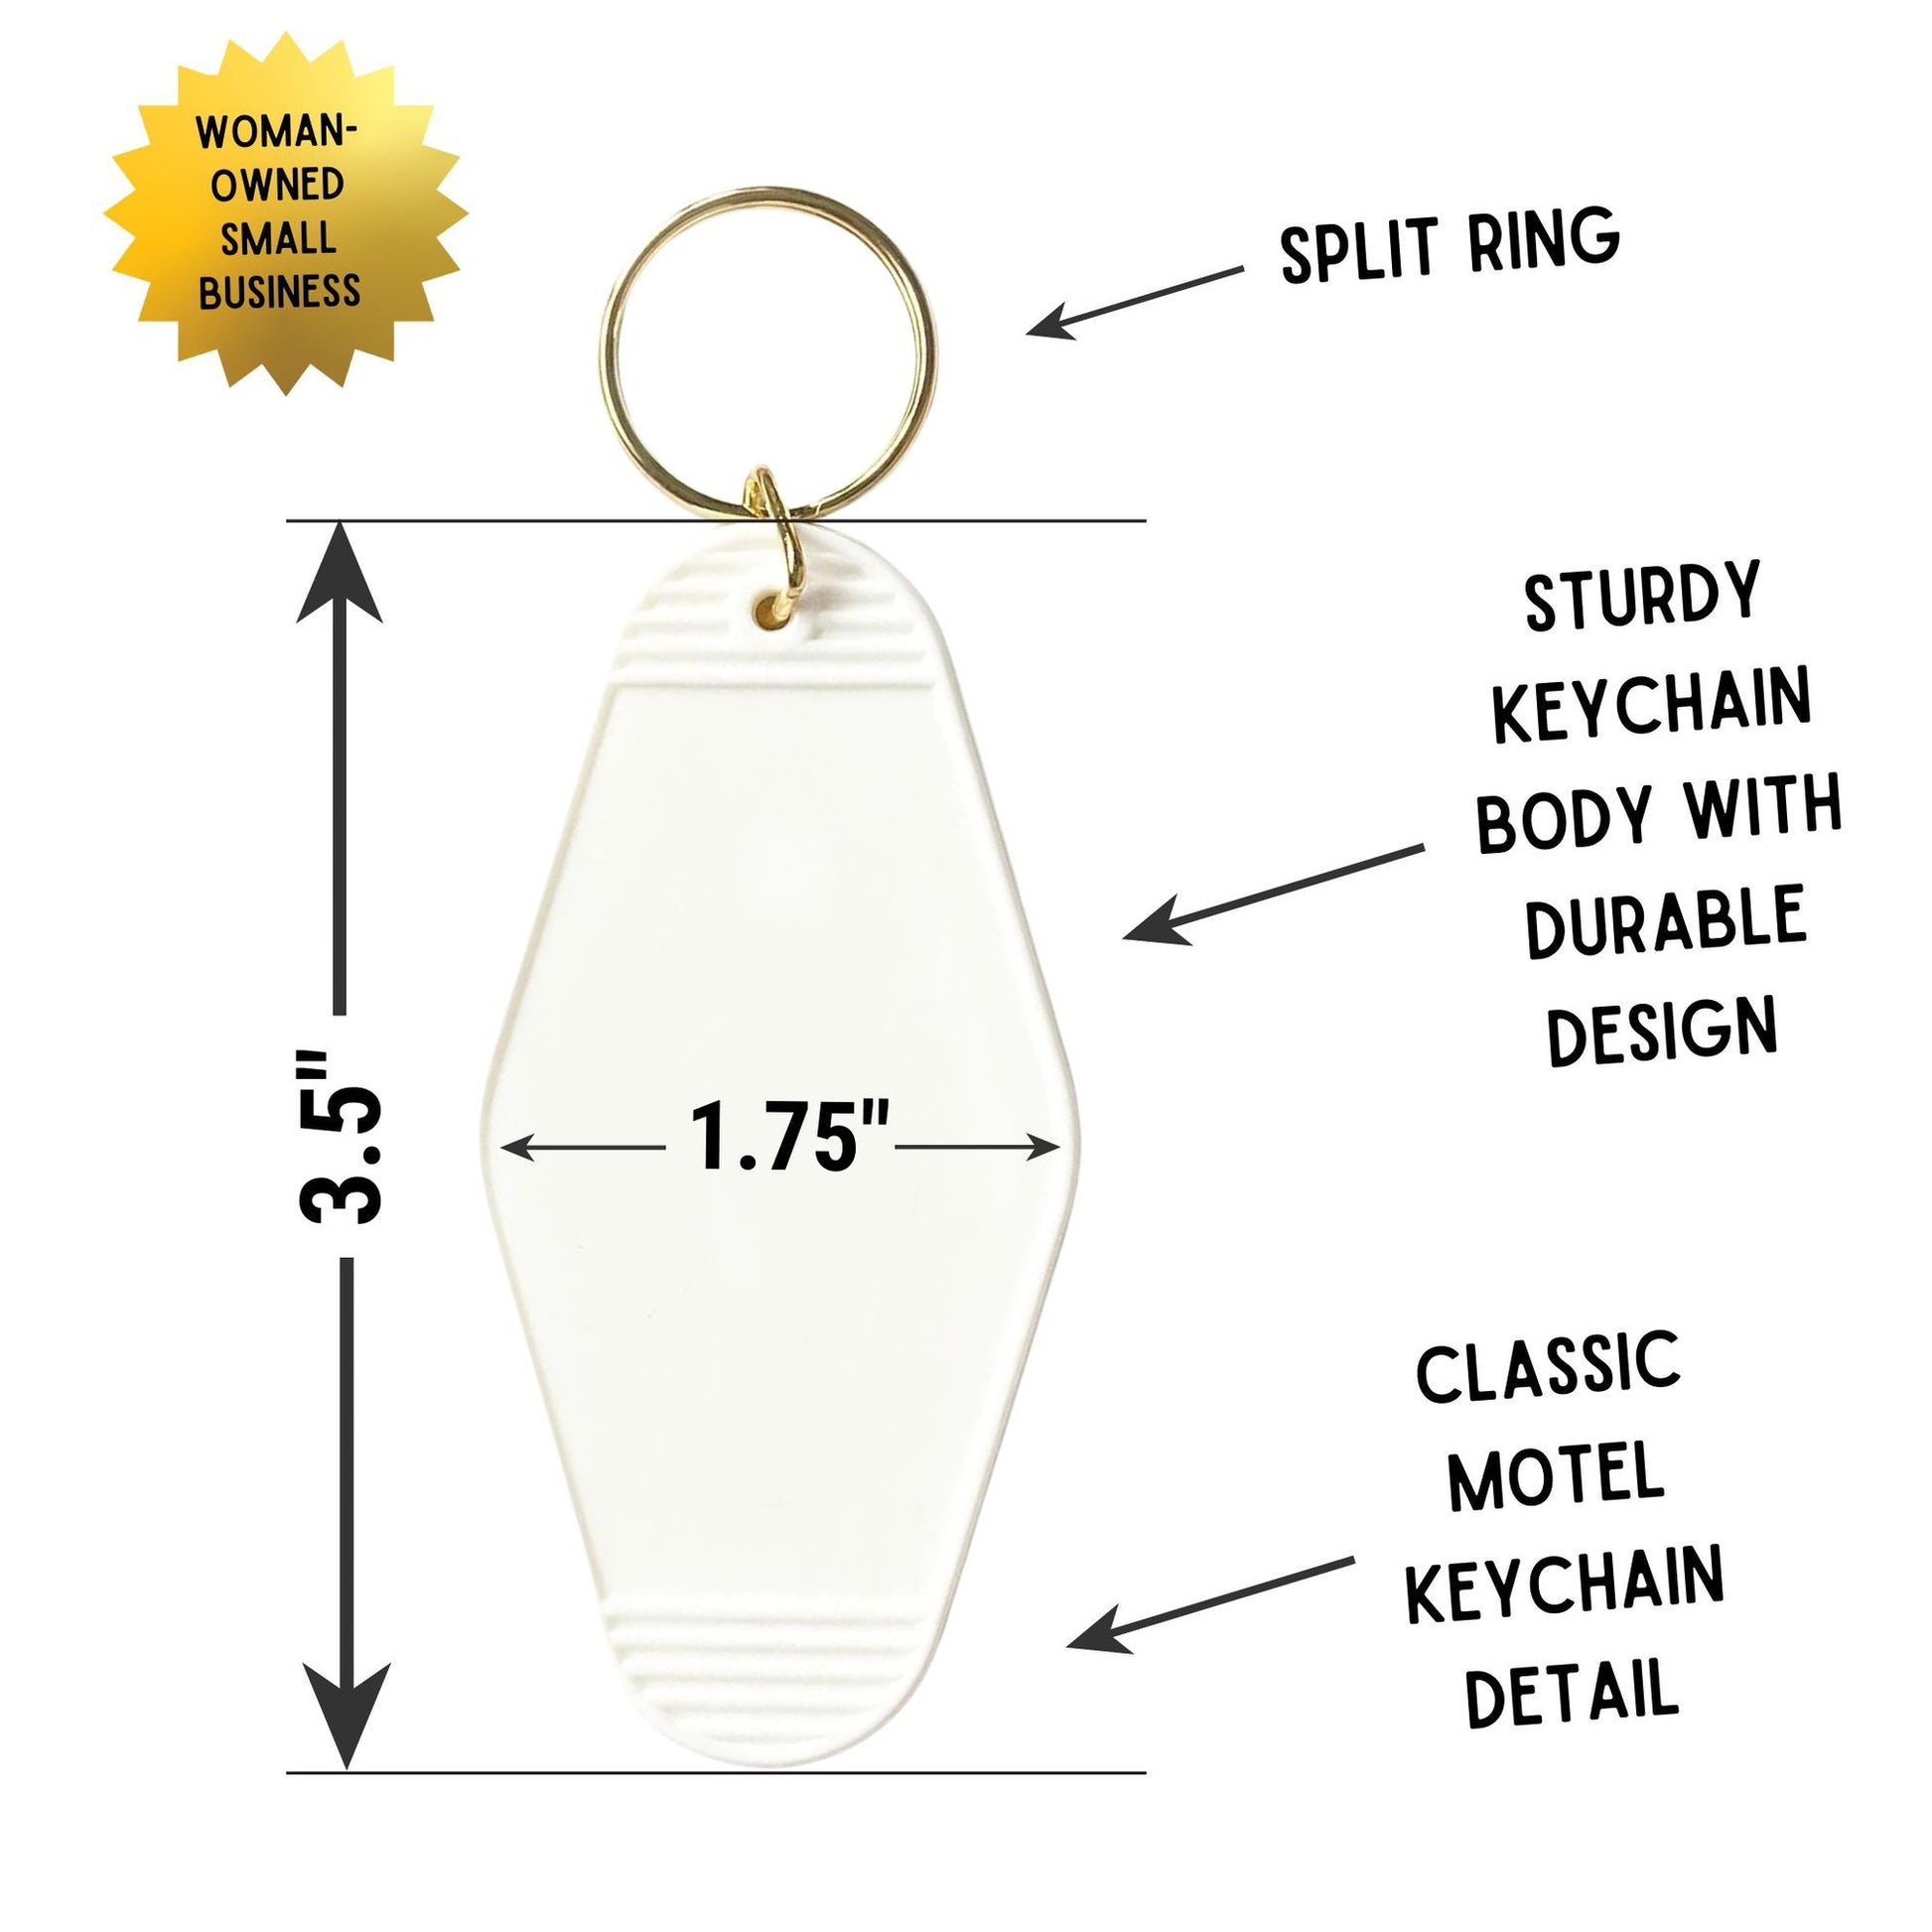 Cryogenically Freeze Me and Wake Me When Star Trek's Real Motel Style Keychain in Red and Gold